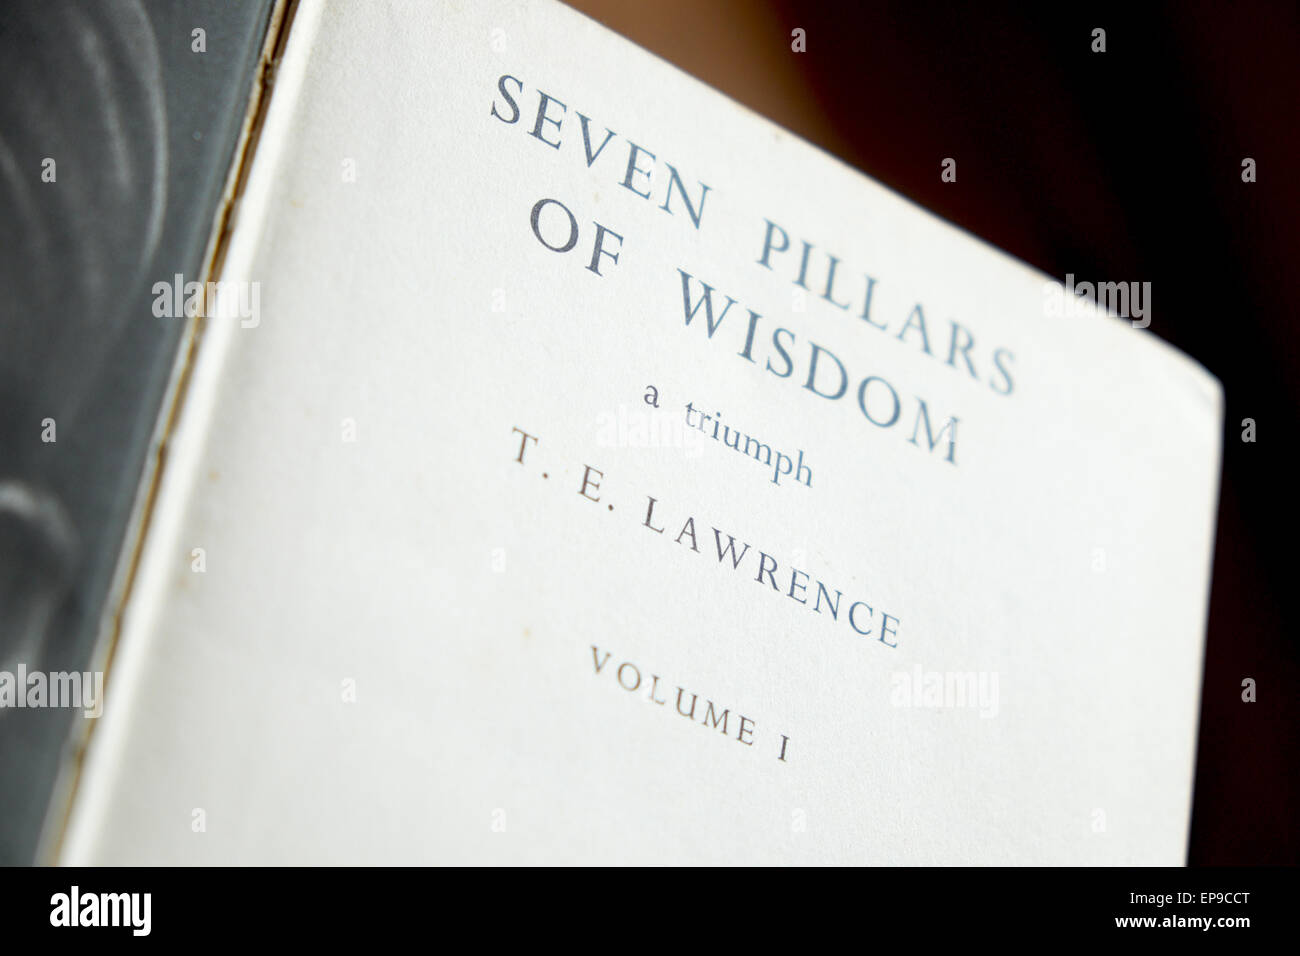 The Seven Pillars of Wisdom book written by T E Lawrence, Lawrence of Arabia about the Arab Revolt desert campaign in WW1 Stock Photo